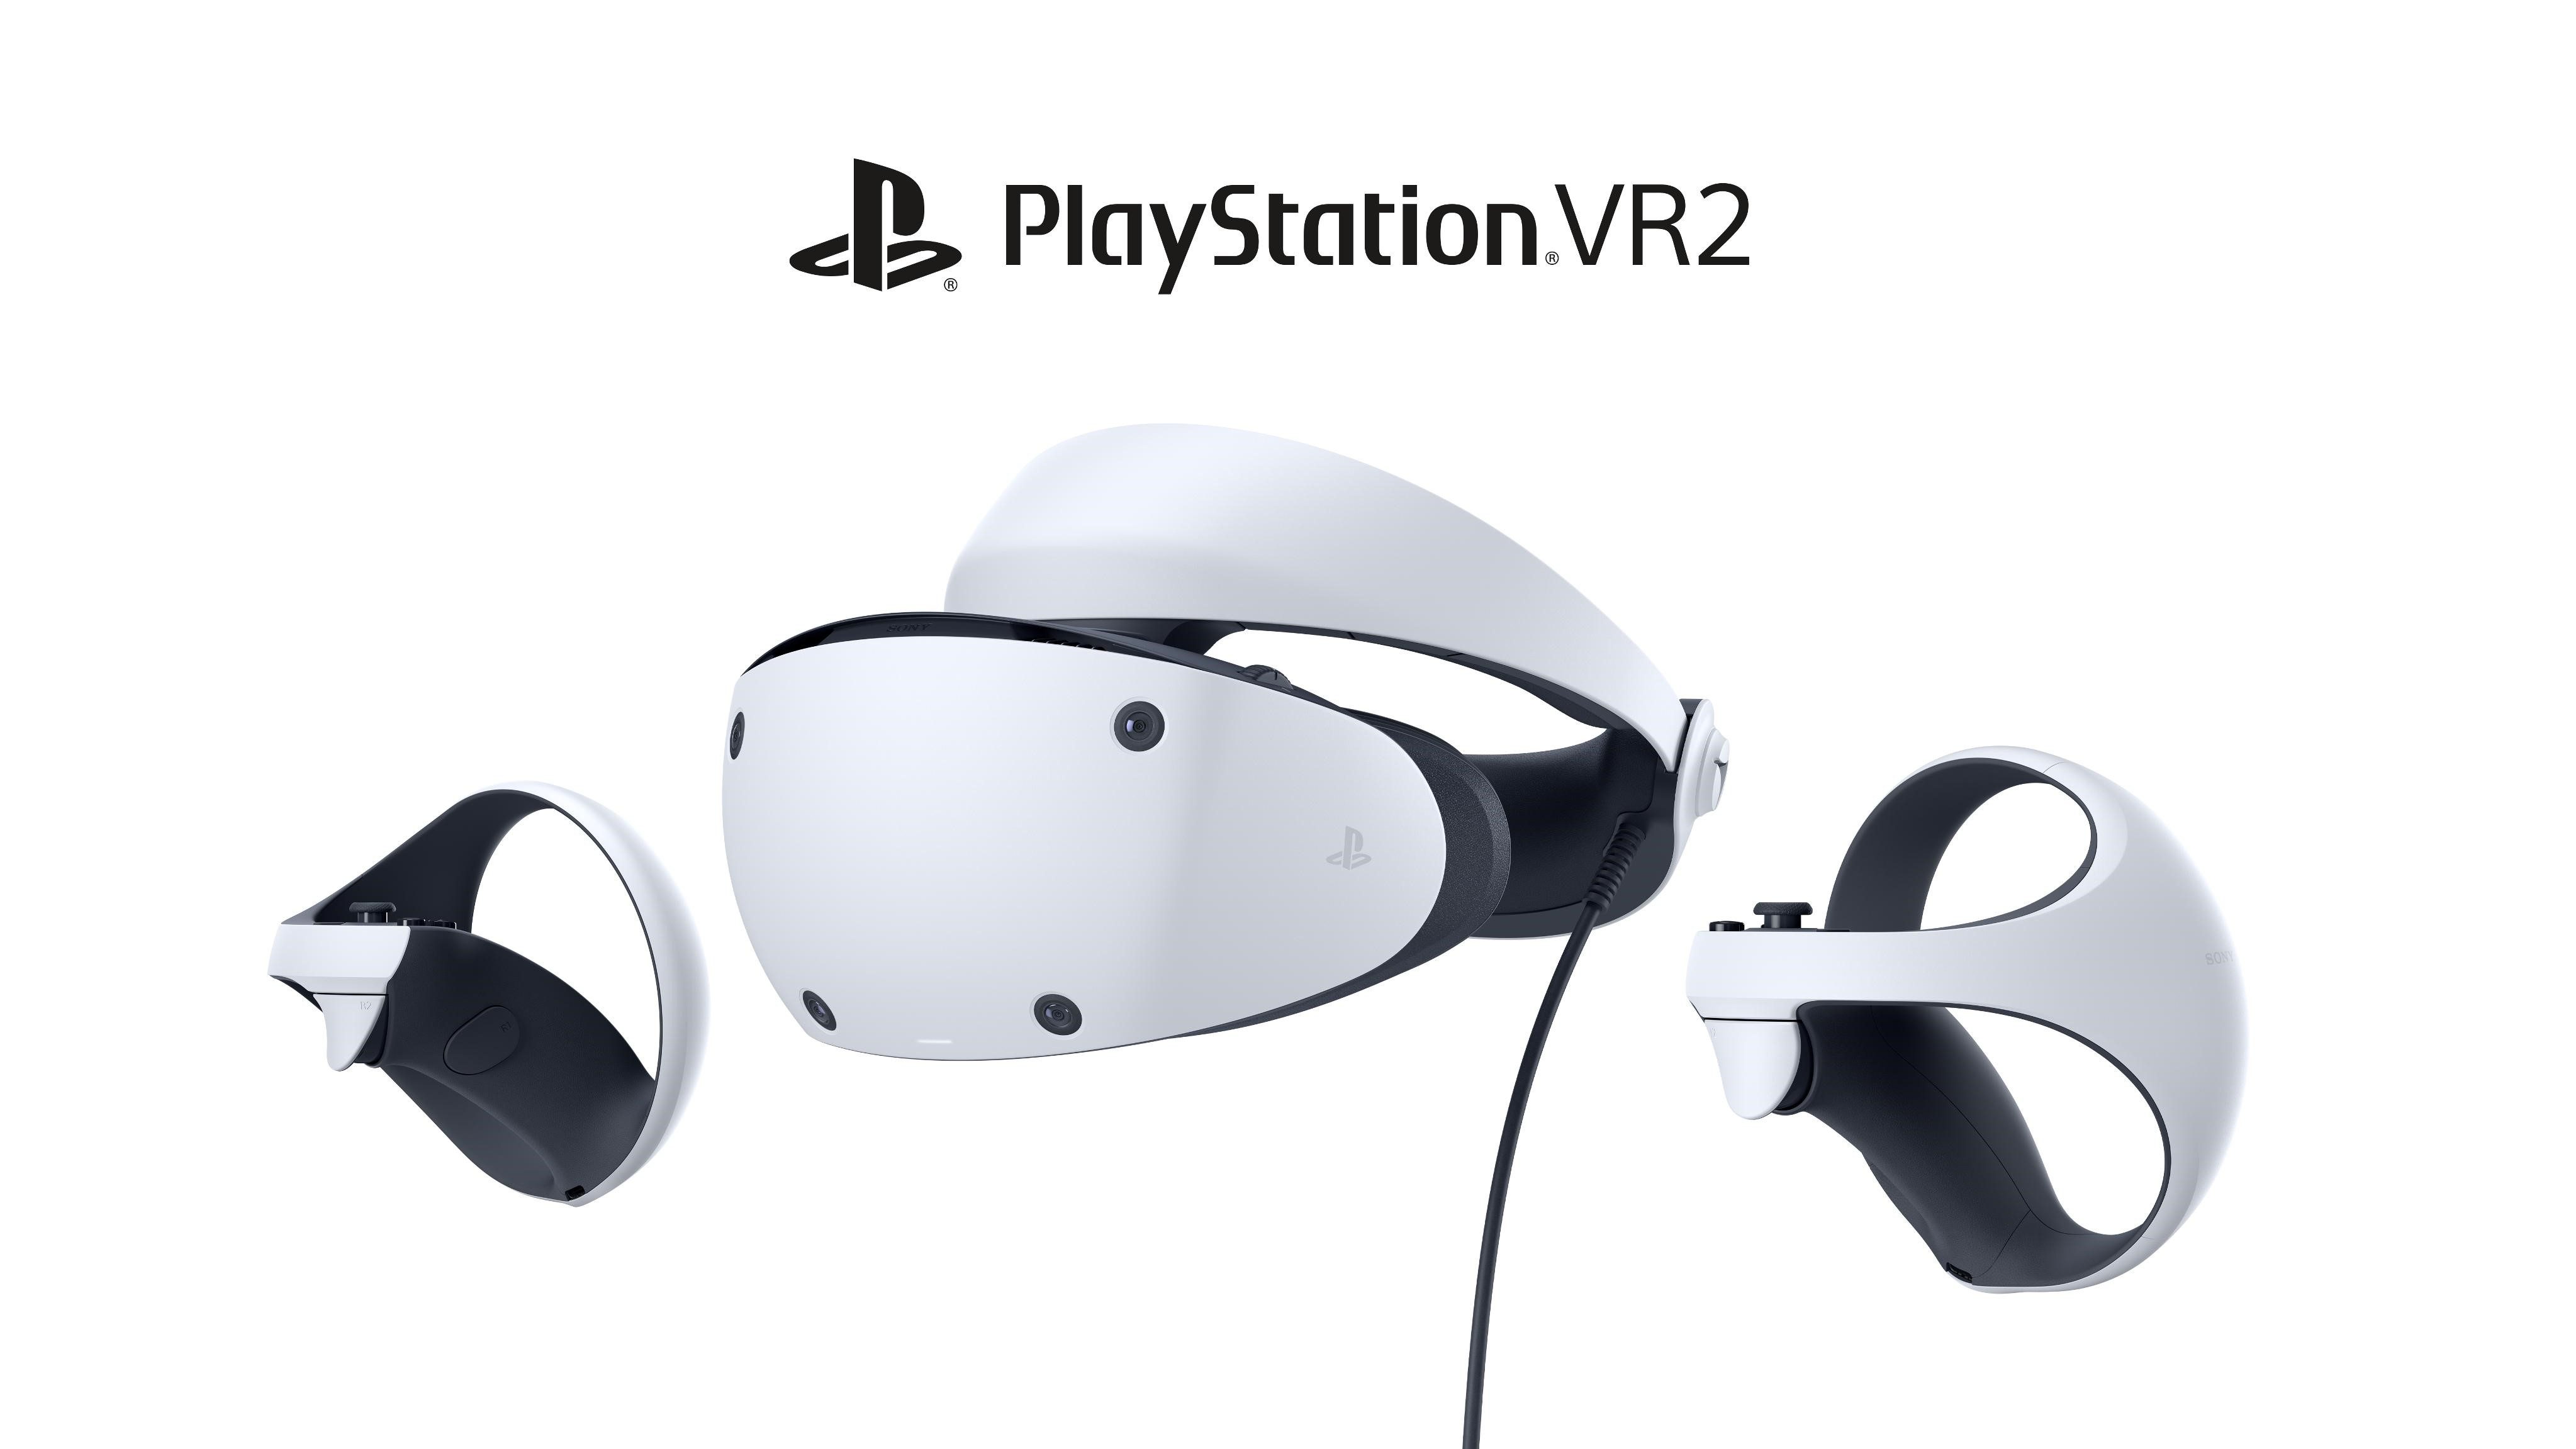 PlayStation VR2 Finally Revealed in First Images - Road to VR